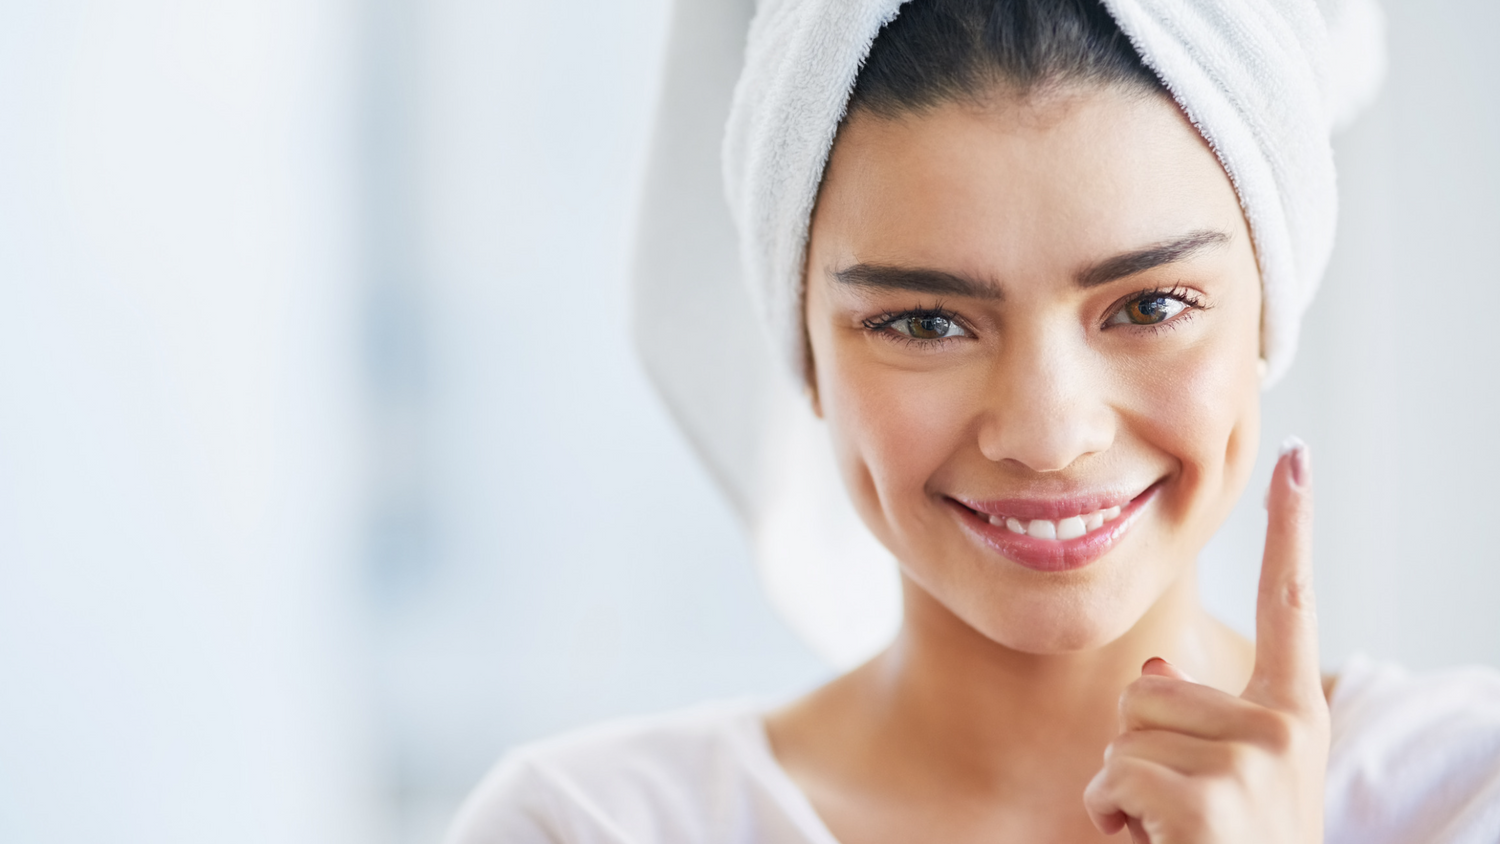 7 Hygiene Habits You're Neglecting in Your Skincare Routine